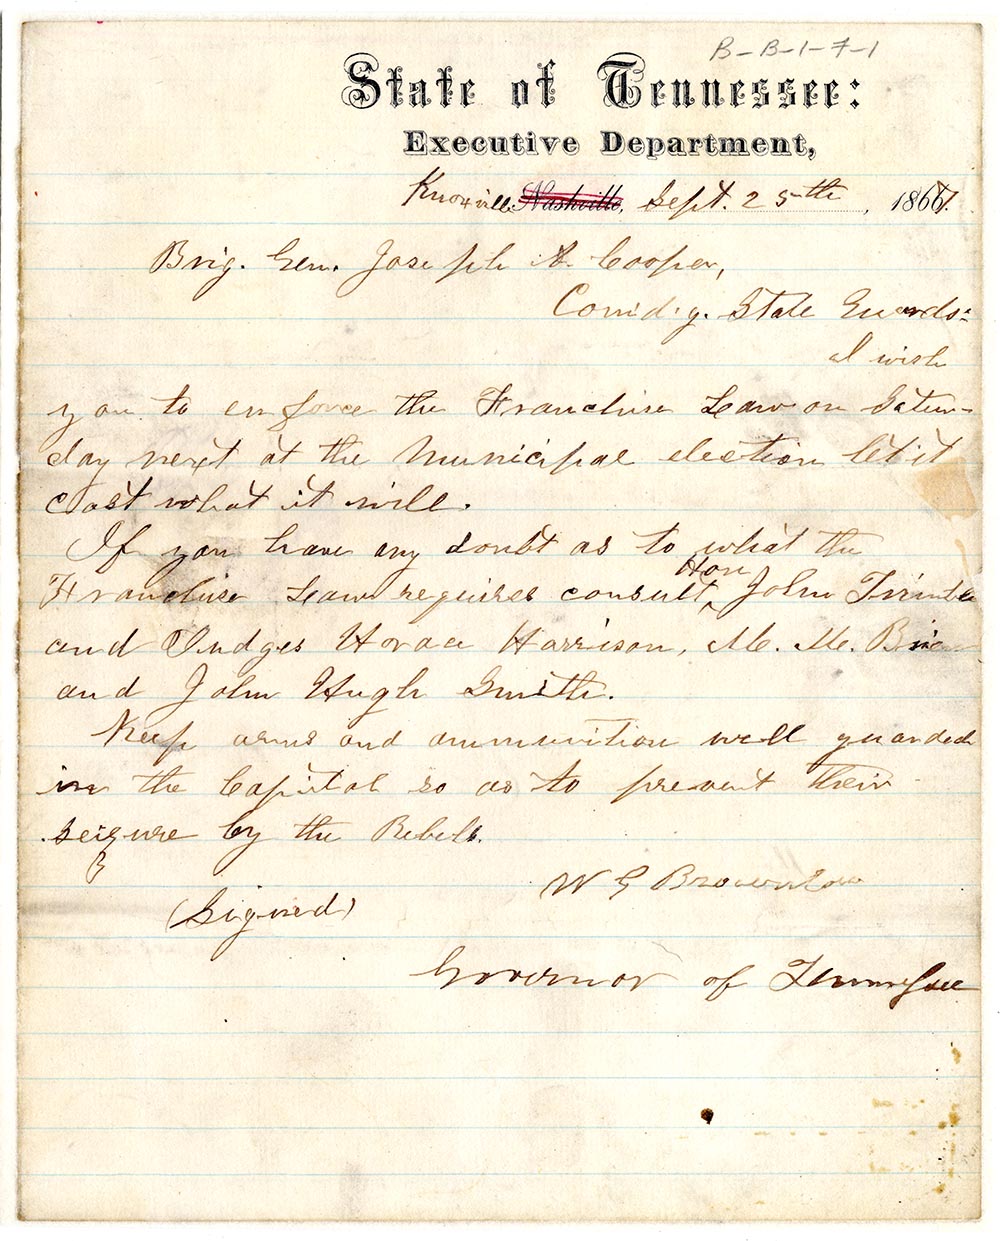 Letter from Governor William G. Brownlow ordering the state militia to enforce the franchise law